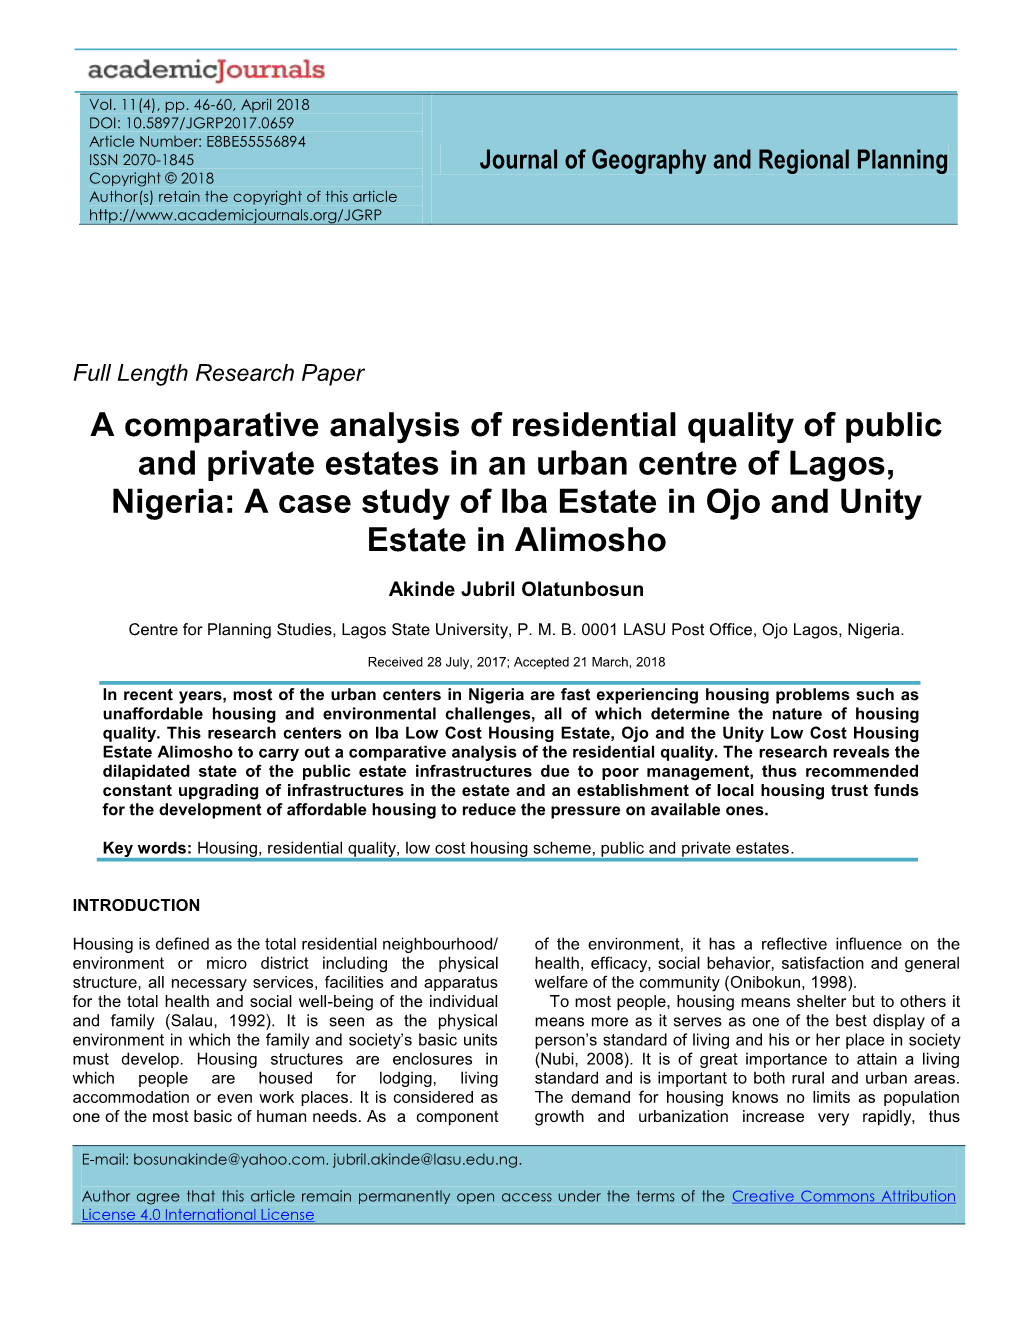 A Comparative Analysis of Residential Quality Of